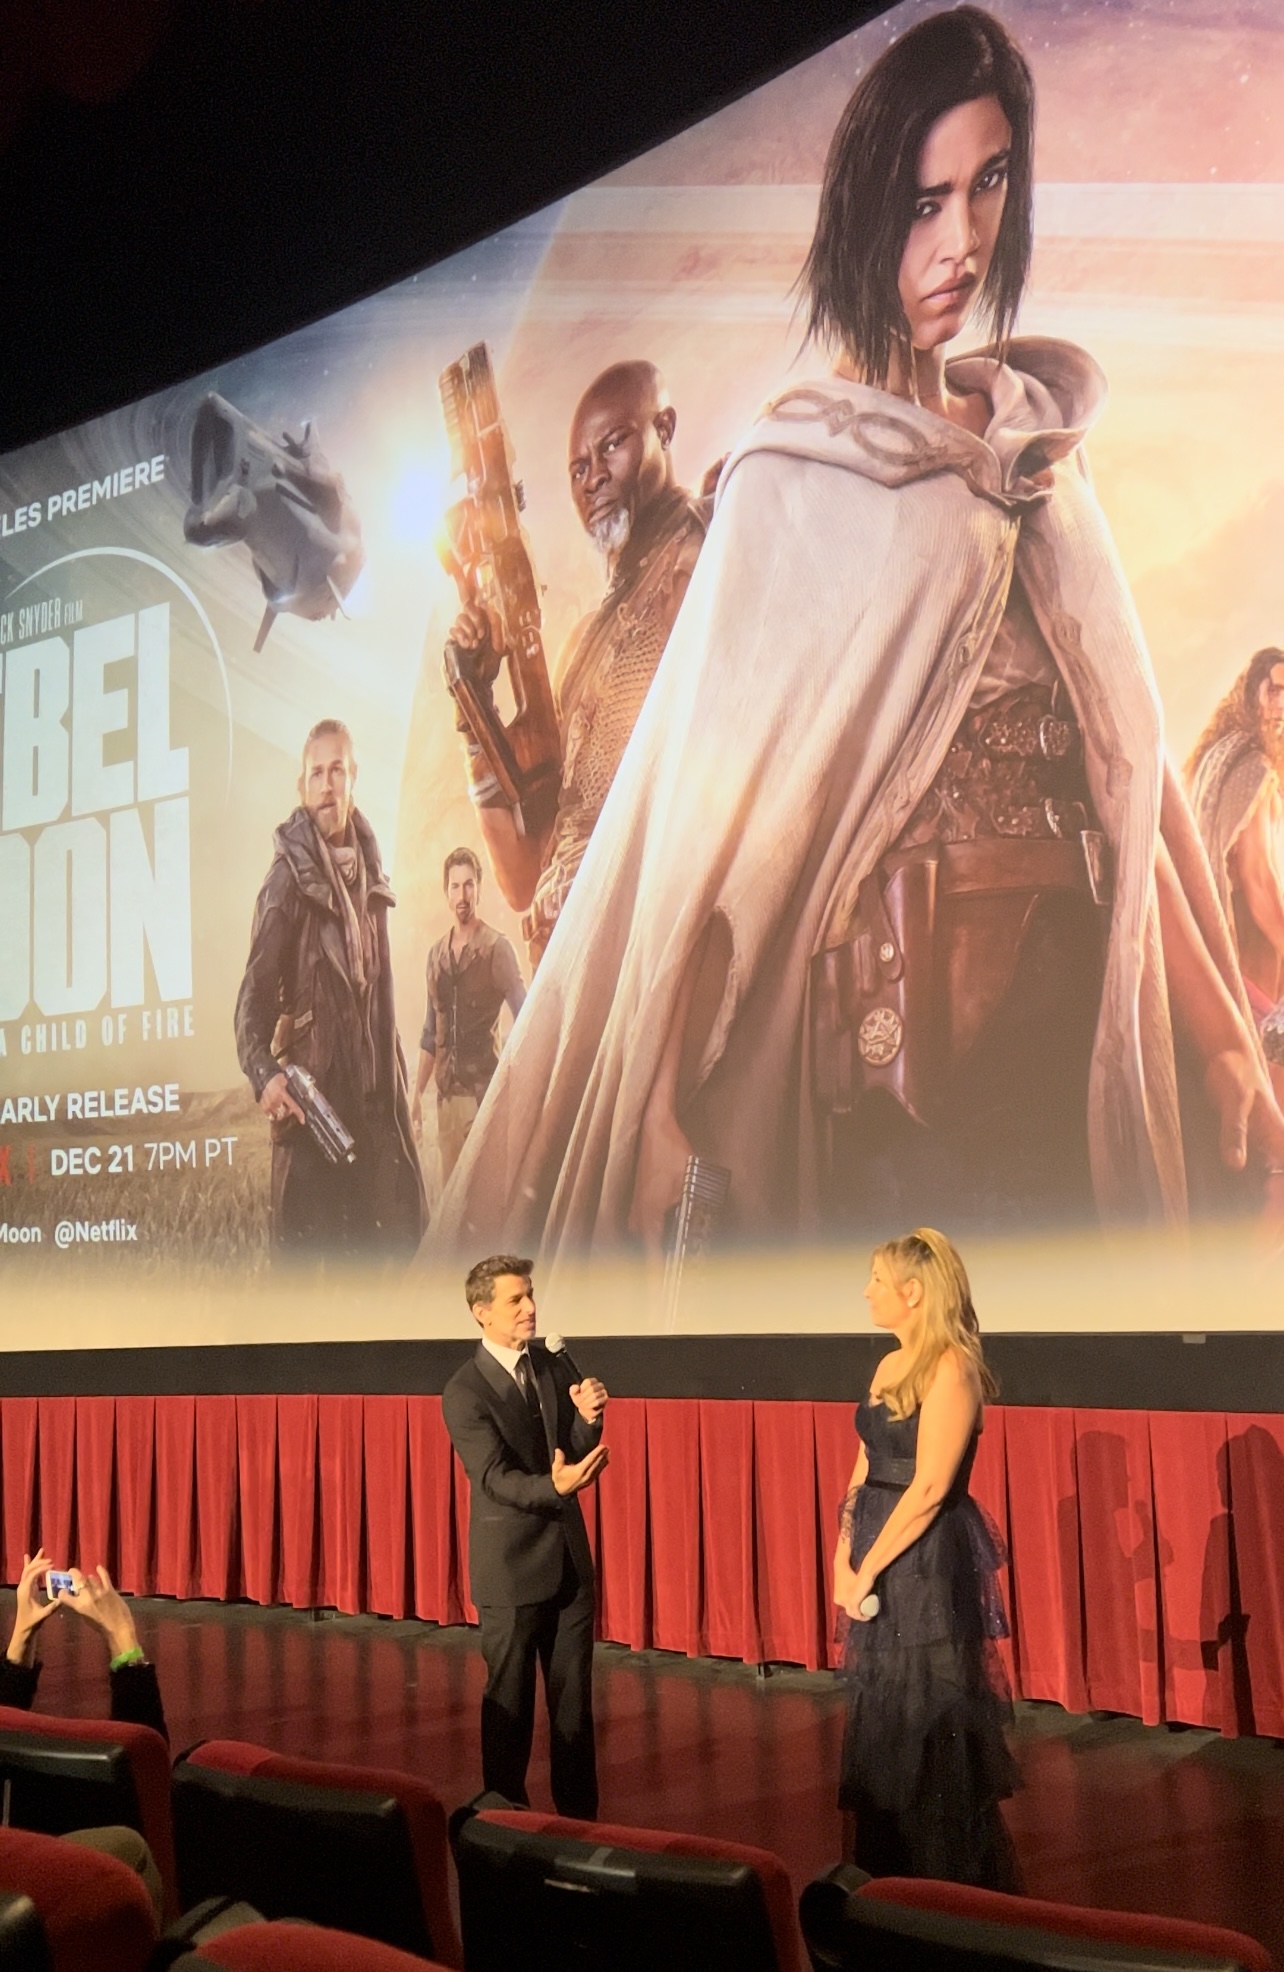 Read more about the article A Red Carpet Premiere of Rebel Moon by Zack Snyder in Los Angeles